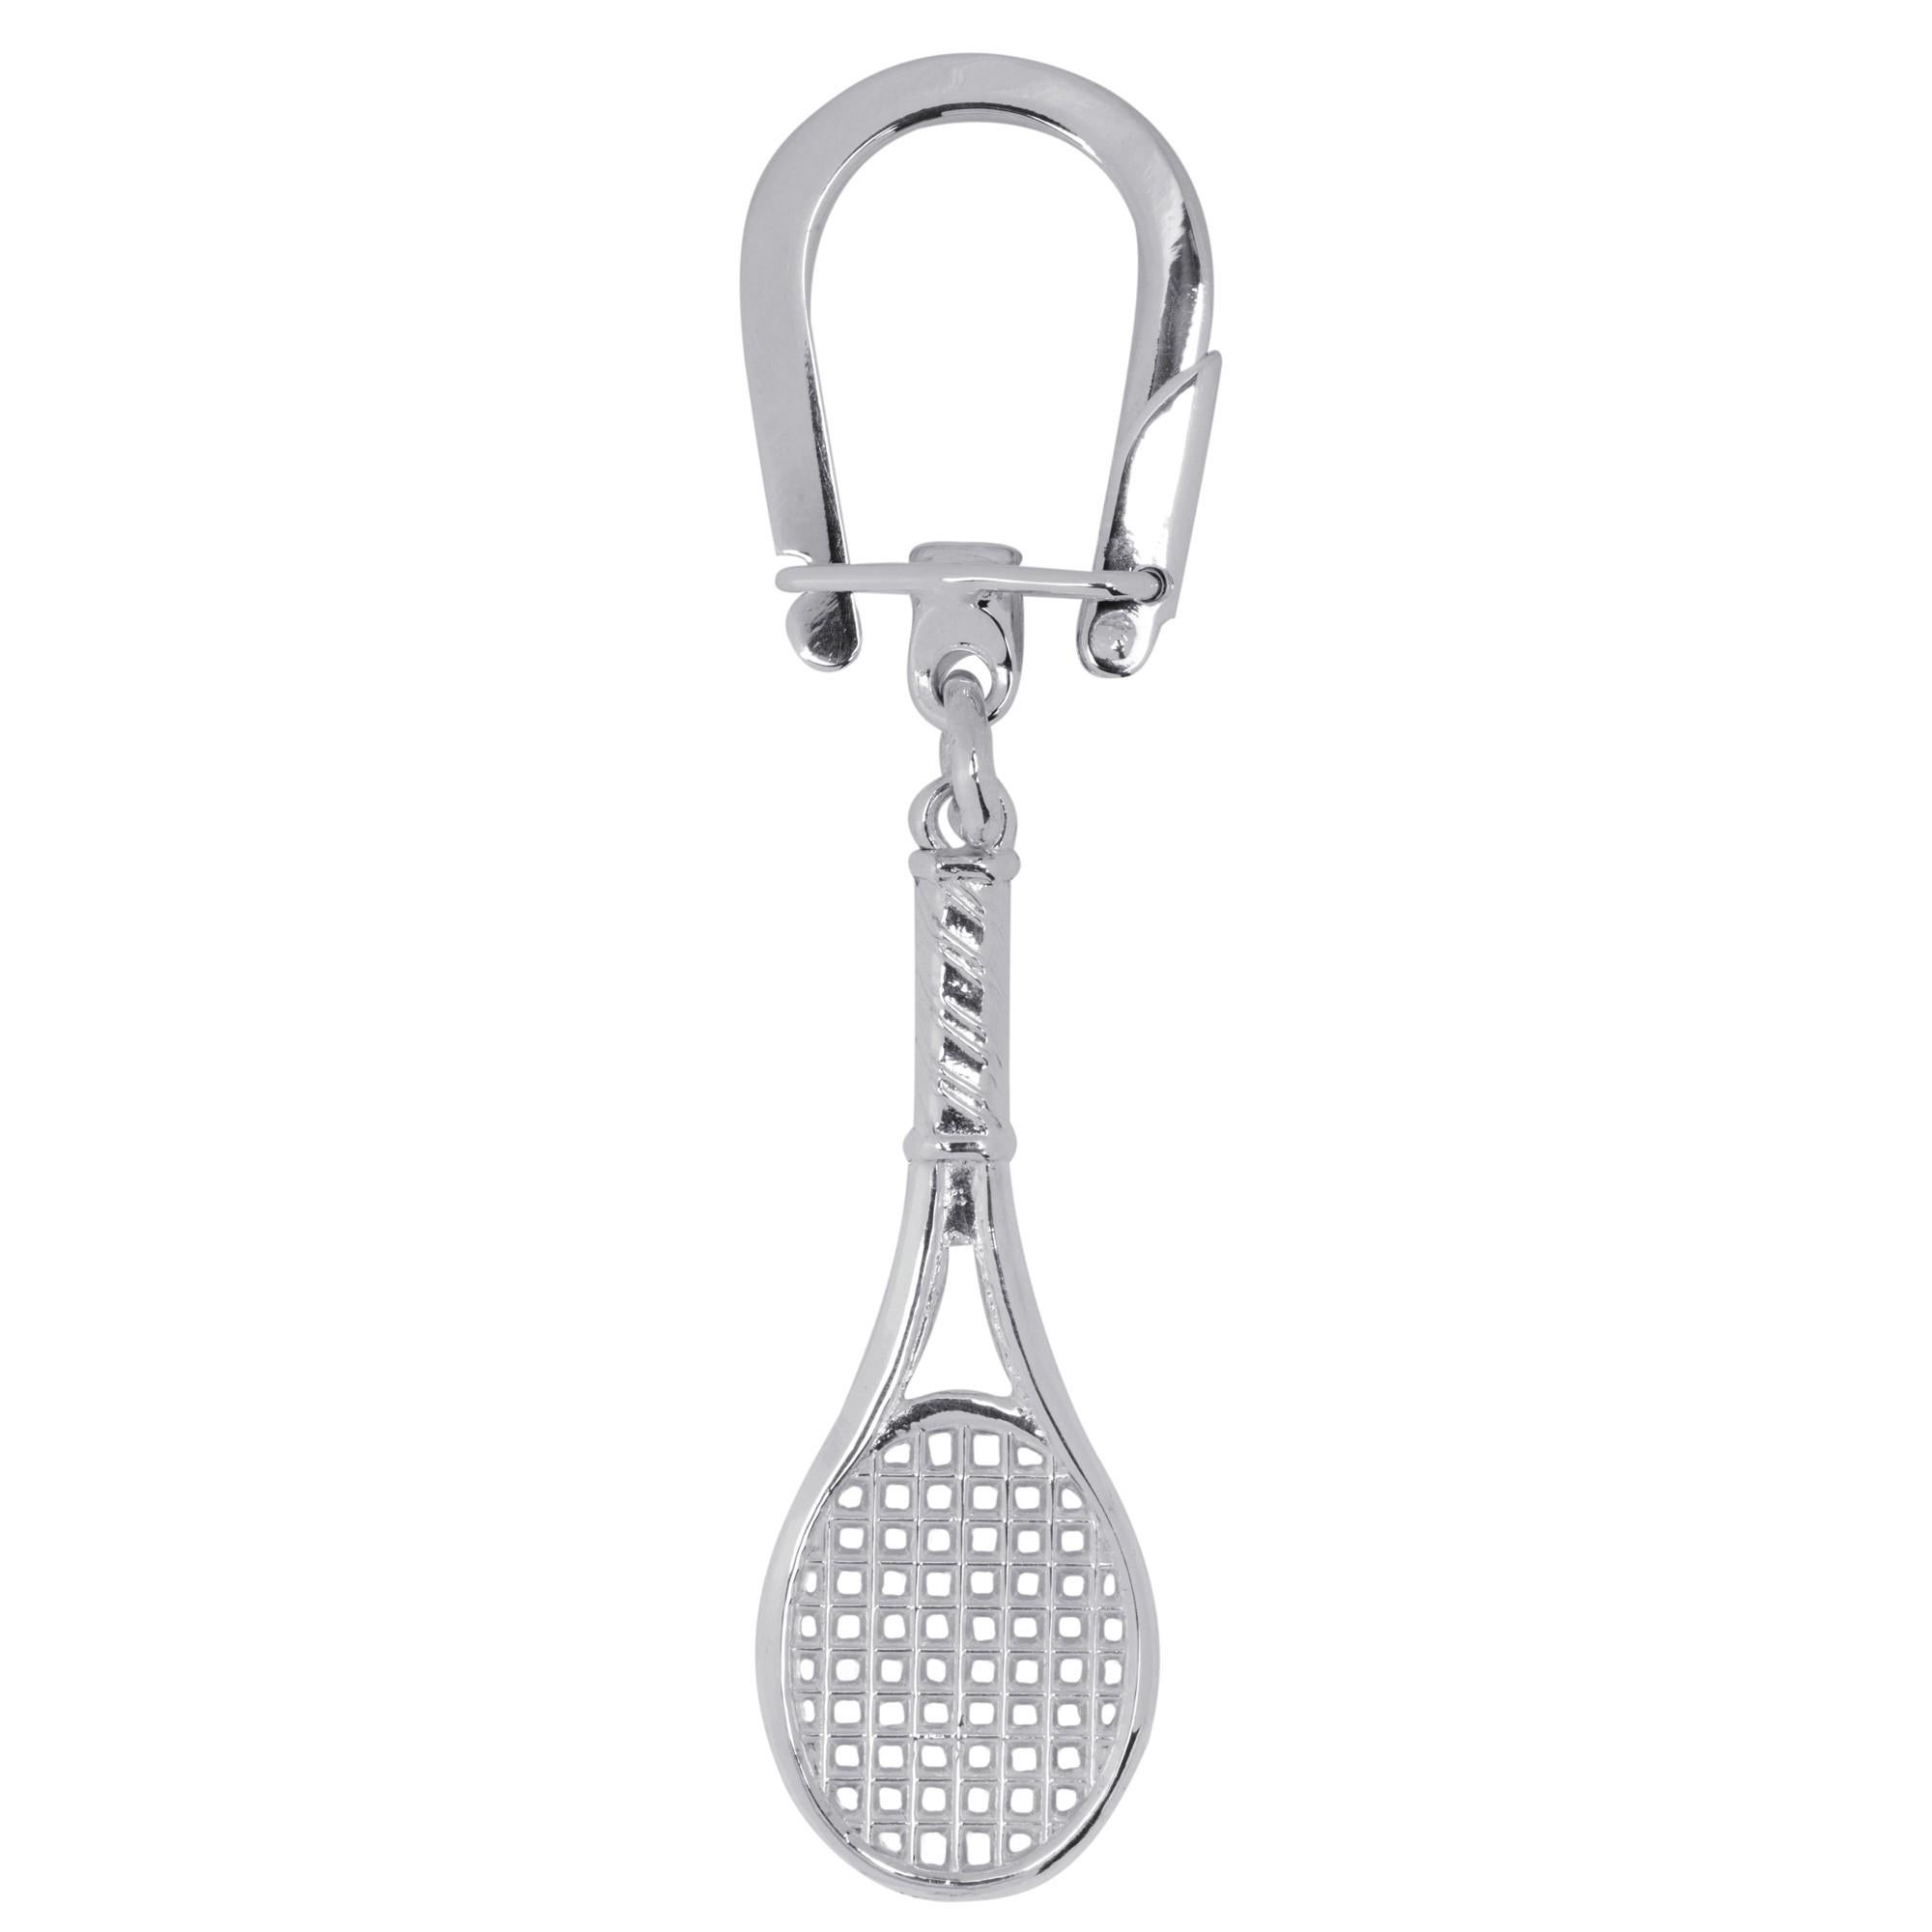 Alex Jona design collection, hand crafted in Italy, Sterling Silver Tennis Racket key holder.
Racket Dimensions : L 21.09 in / 53.57 x W 0.85 in / 21.75 mm x Depth: 0.11 in / 2.99 mm

Alex Jona gifts stand out, not only for their special design and